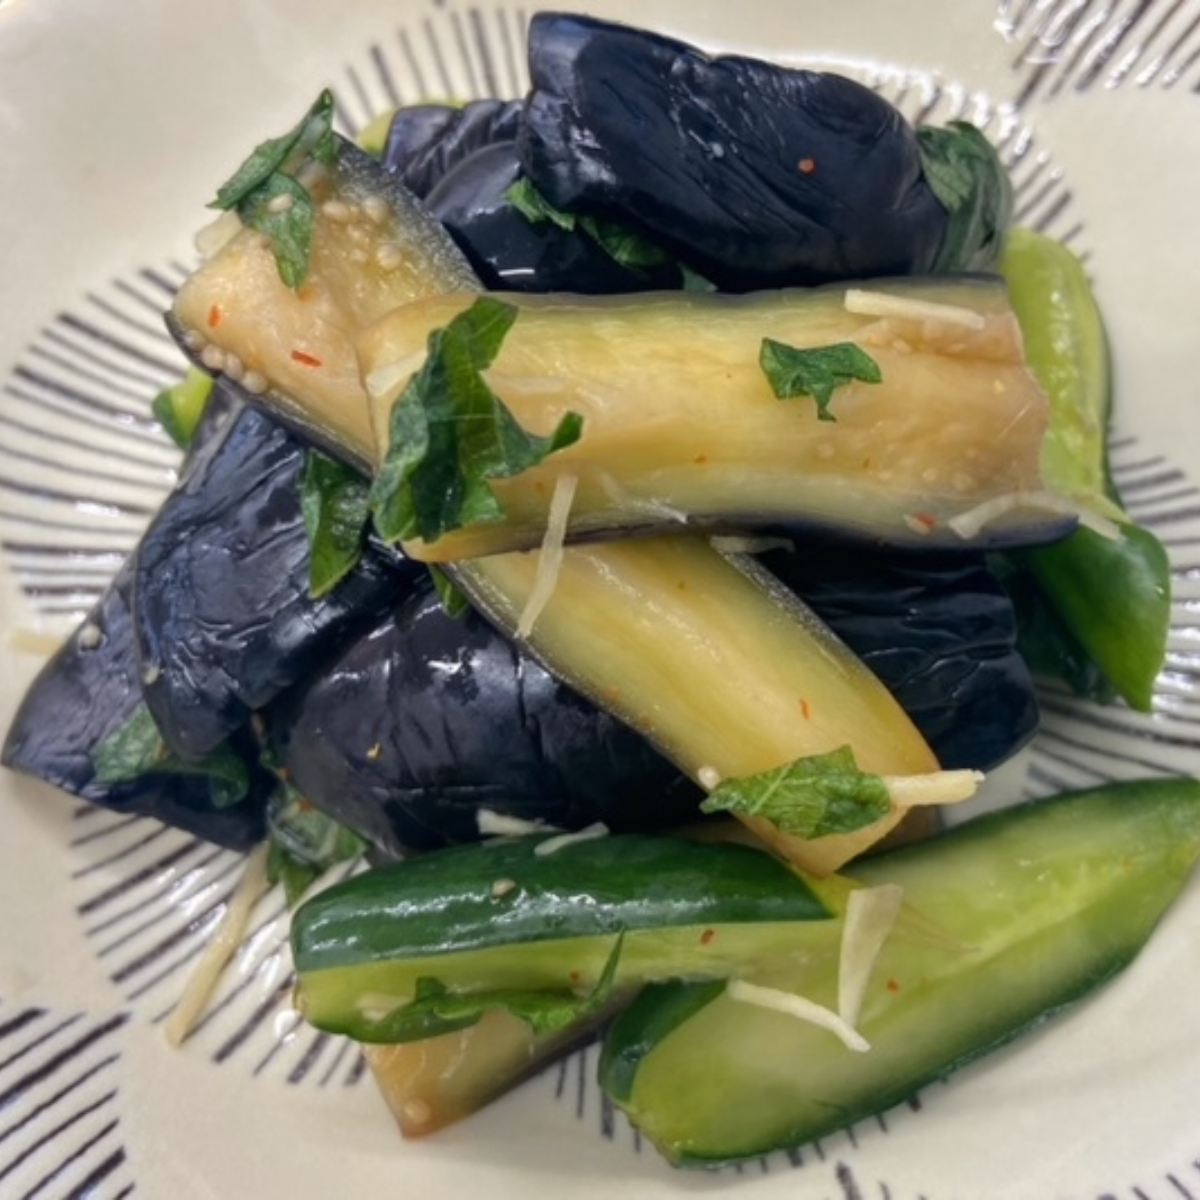 A plate of pickled egg plants and cucumbers